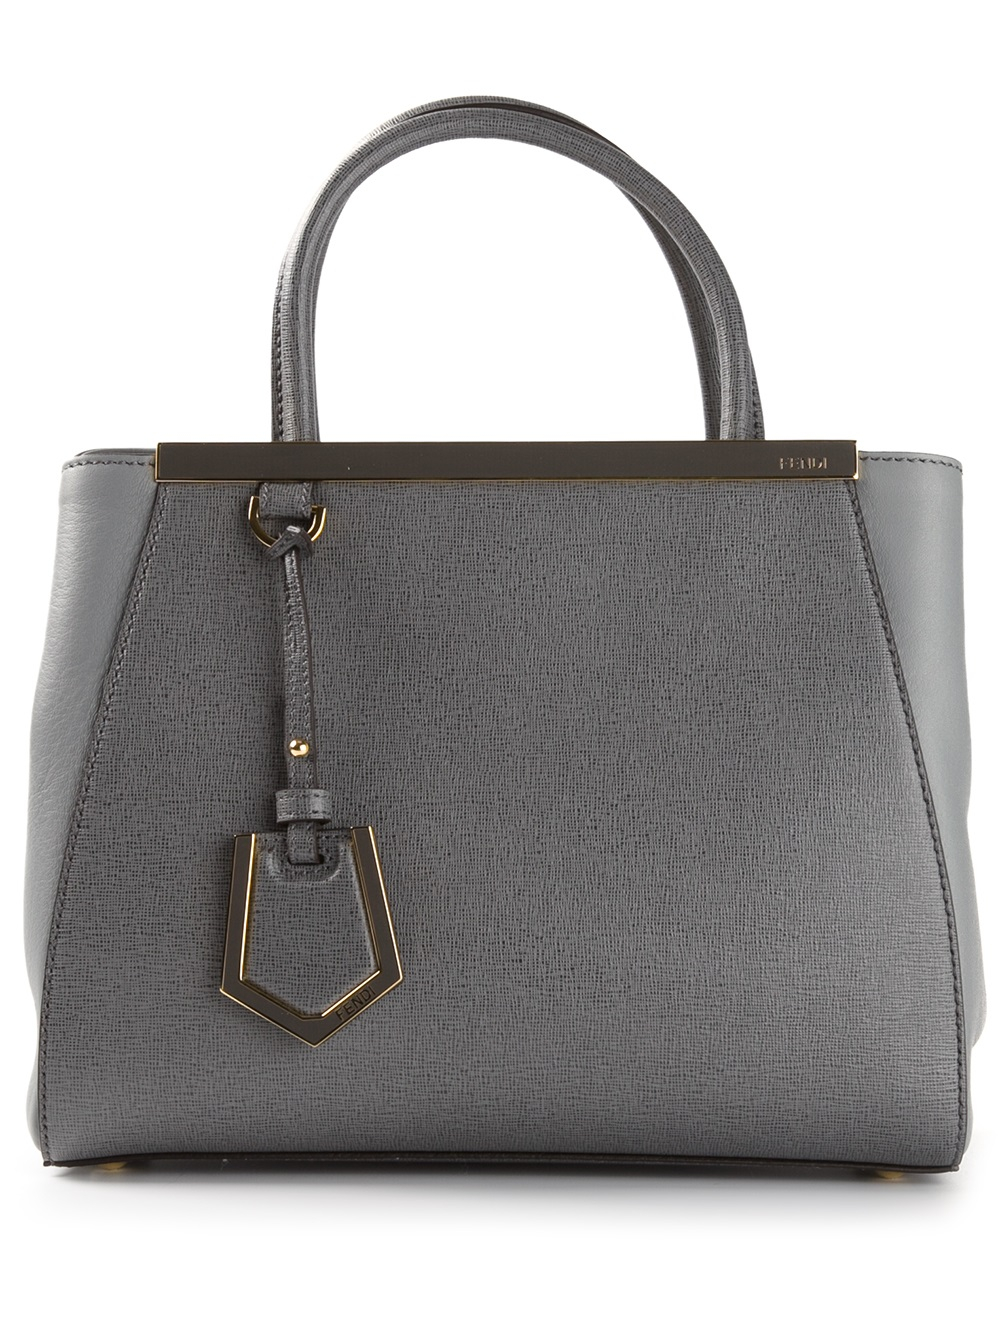 Lyst - Fendi Small 2jours Tote in Gray